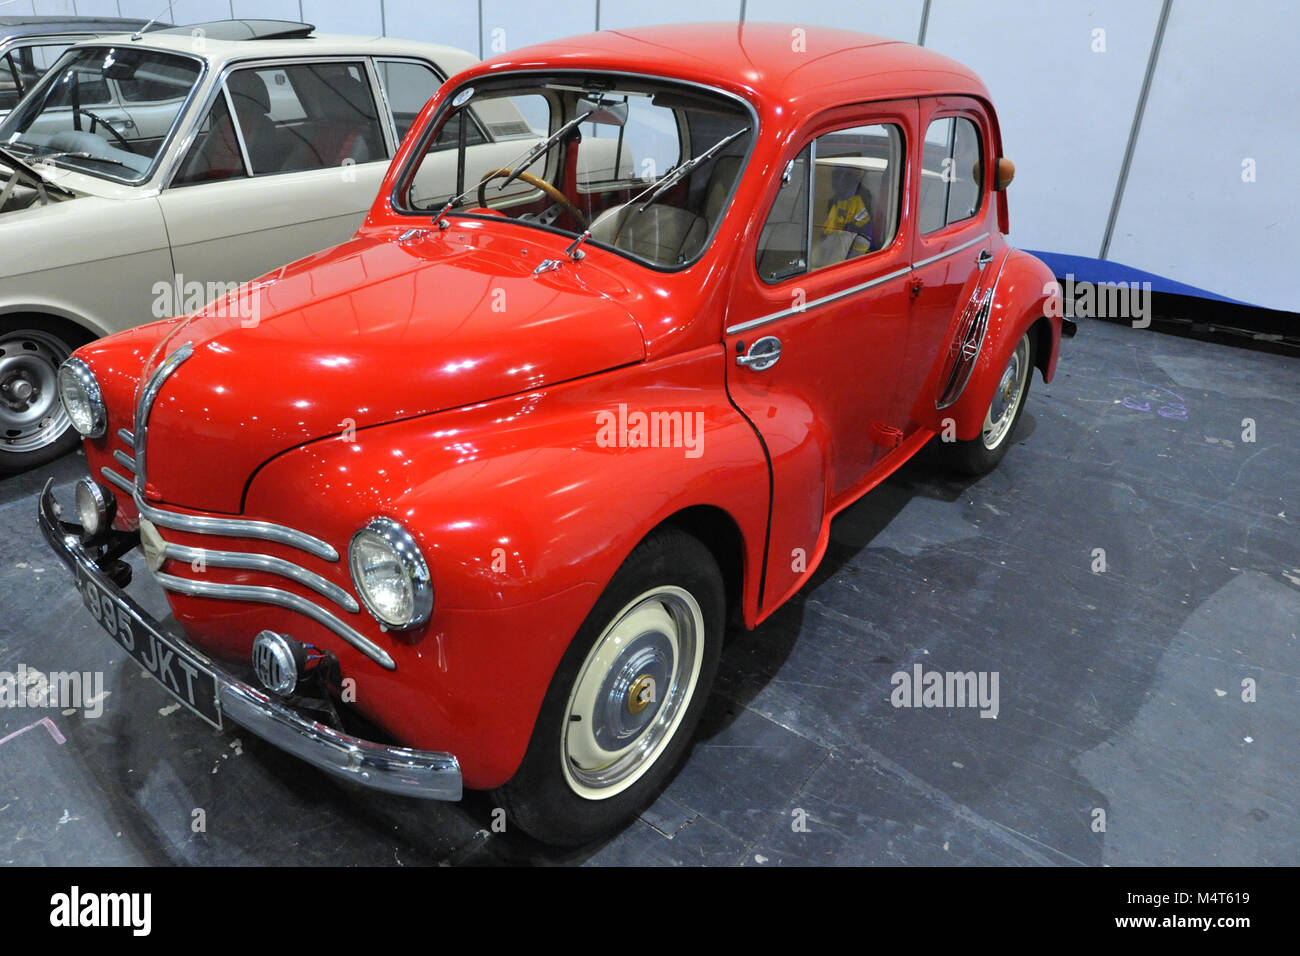 A 1961 Renault 4CV 1.4 on display at the London Classic Car Show which is taking place at ExCel London, United Kingdom.  More than 700 of the world's finest classic cars are on display at the show ranging from vintage pre-war tourers to a modern concept cars. The show brings in around 37,000 visitors, ranging from serious petrol hea ds to people who just love beautiful and classic vehicles. Credit: Michael Preston/Alamy Live News Stock Photo